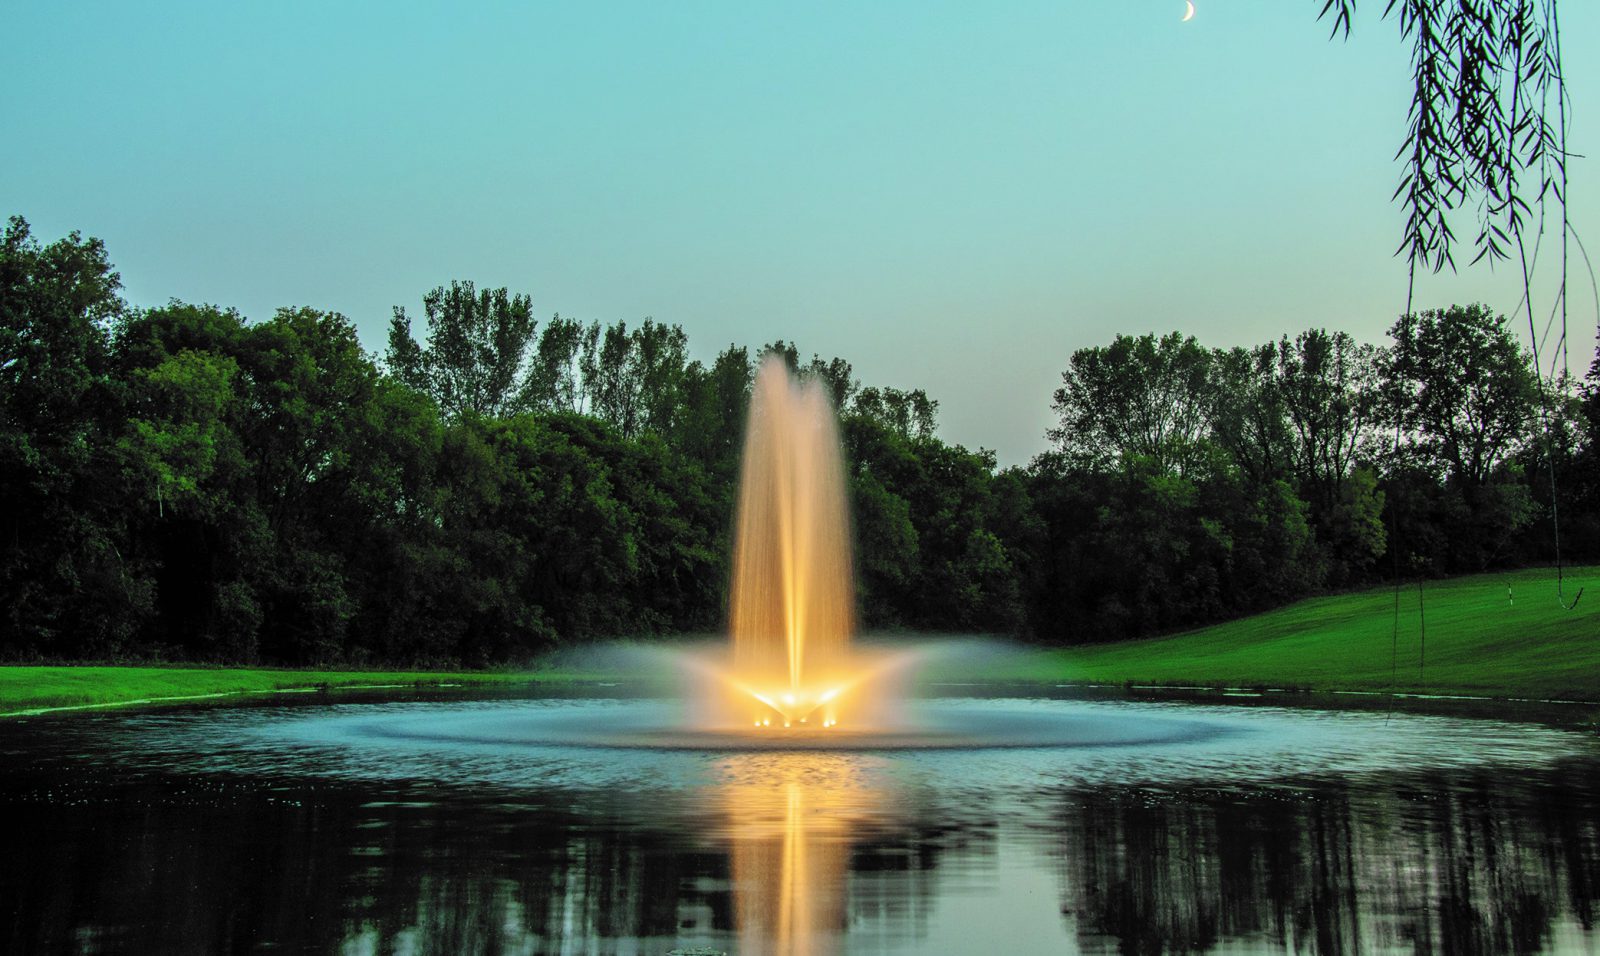 Kasco-JSeries-5-7-5HP-Linden- - fountains and aeration services at solitude lake management - vendor partners